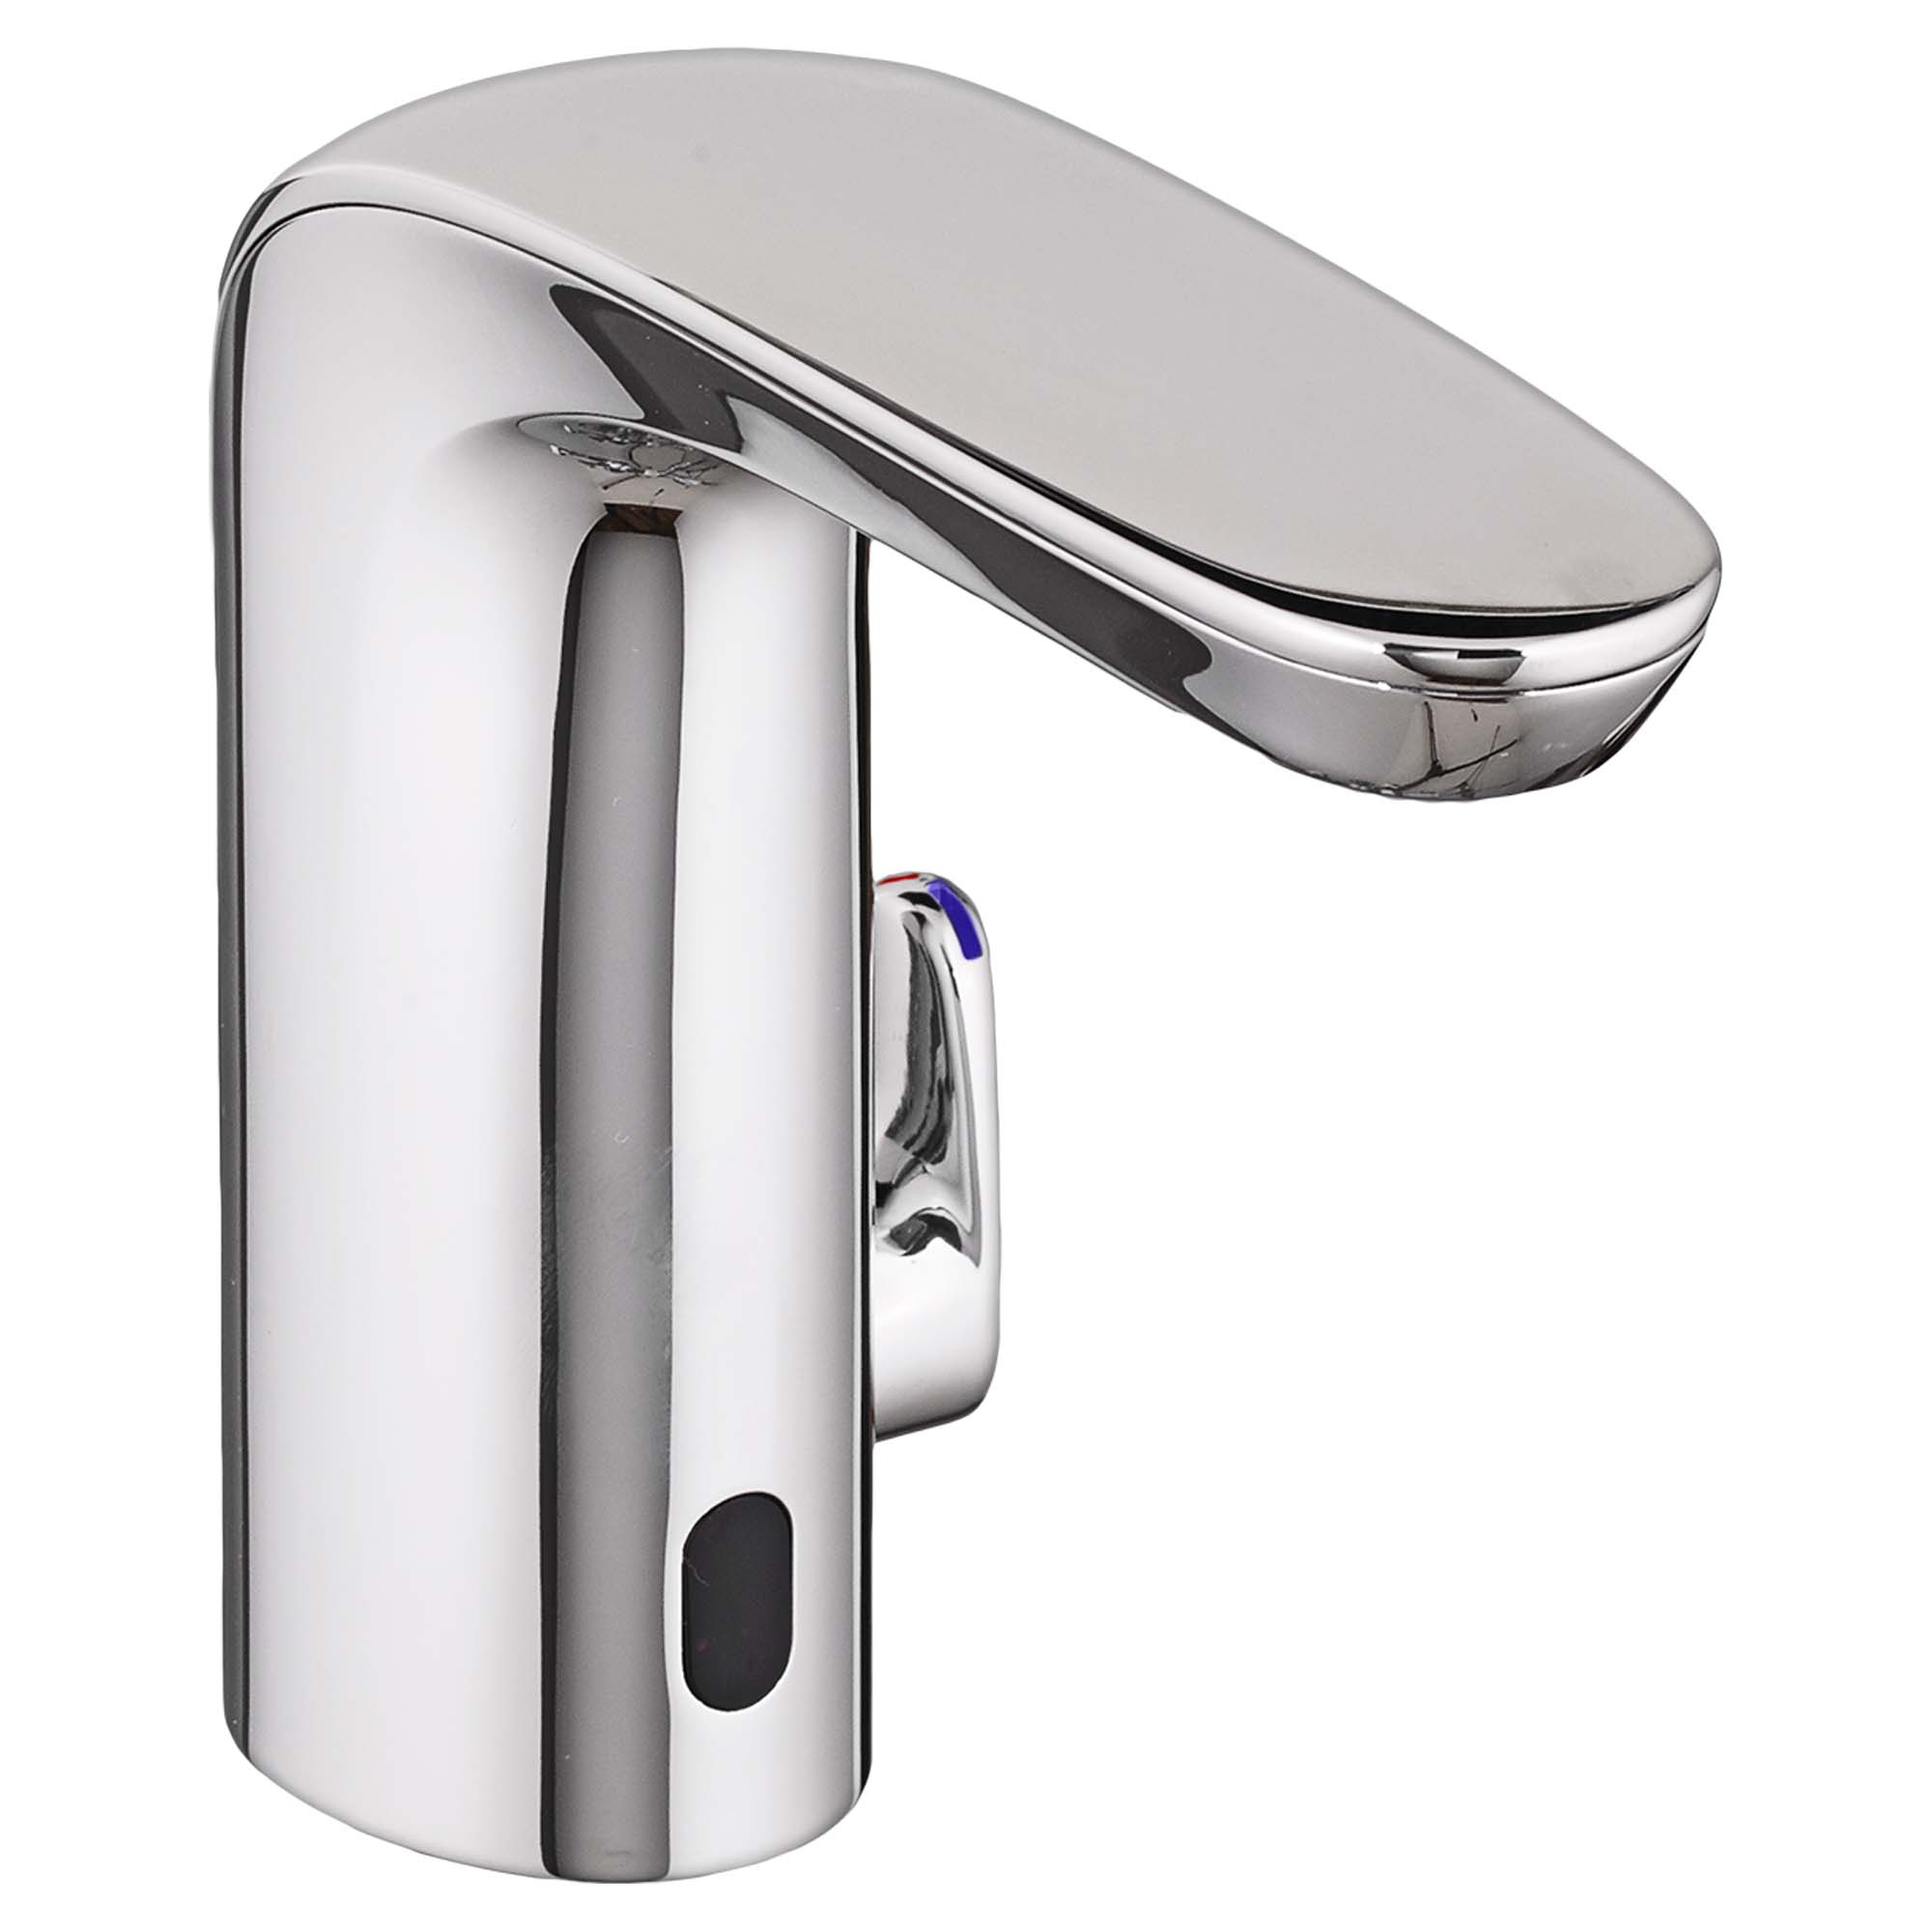 NextGen Selectronic™ Touchless Faucet, Base Model With SmarTherm Safety Shut-Off + ADM, 0.35 gpm/1.3 Lpm